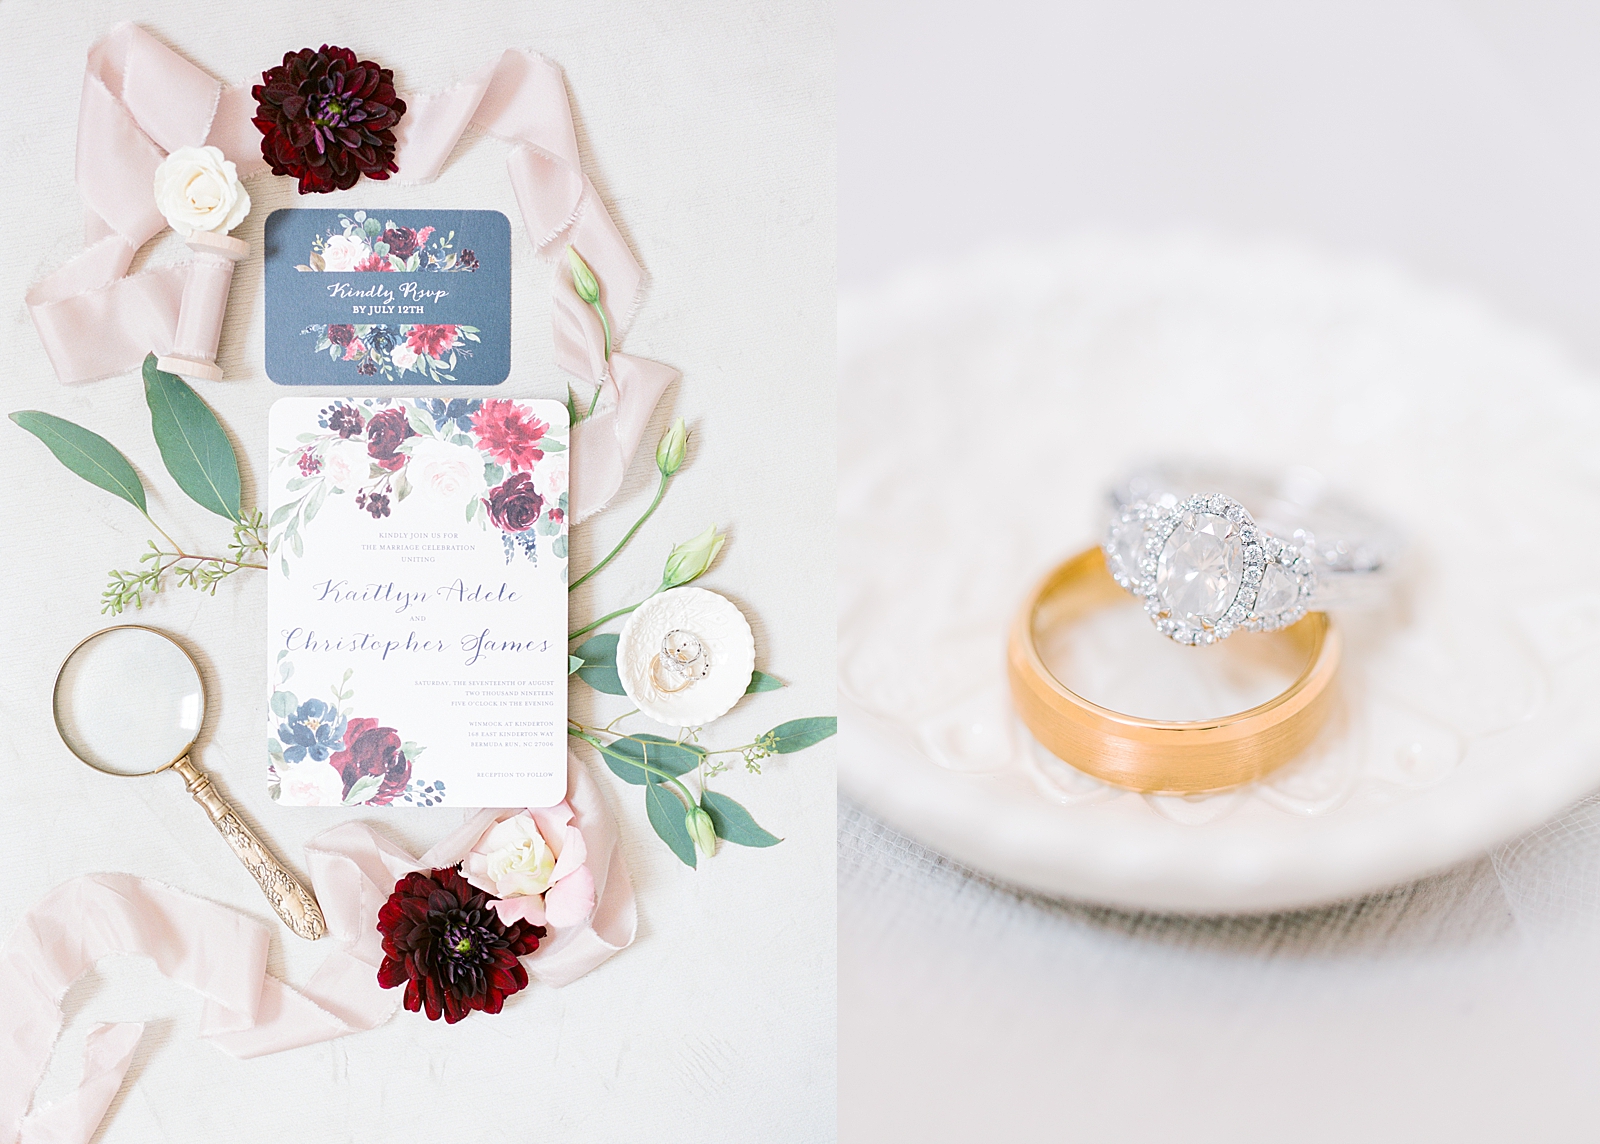 Winmock Wedding Invitation Suite and Detail of Rings in a Dish Photos